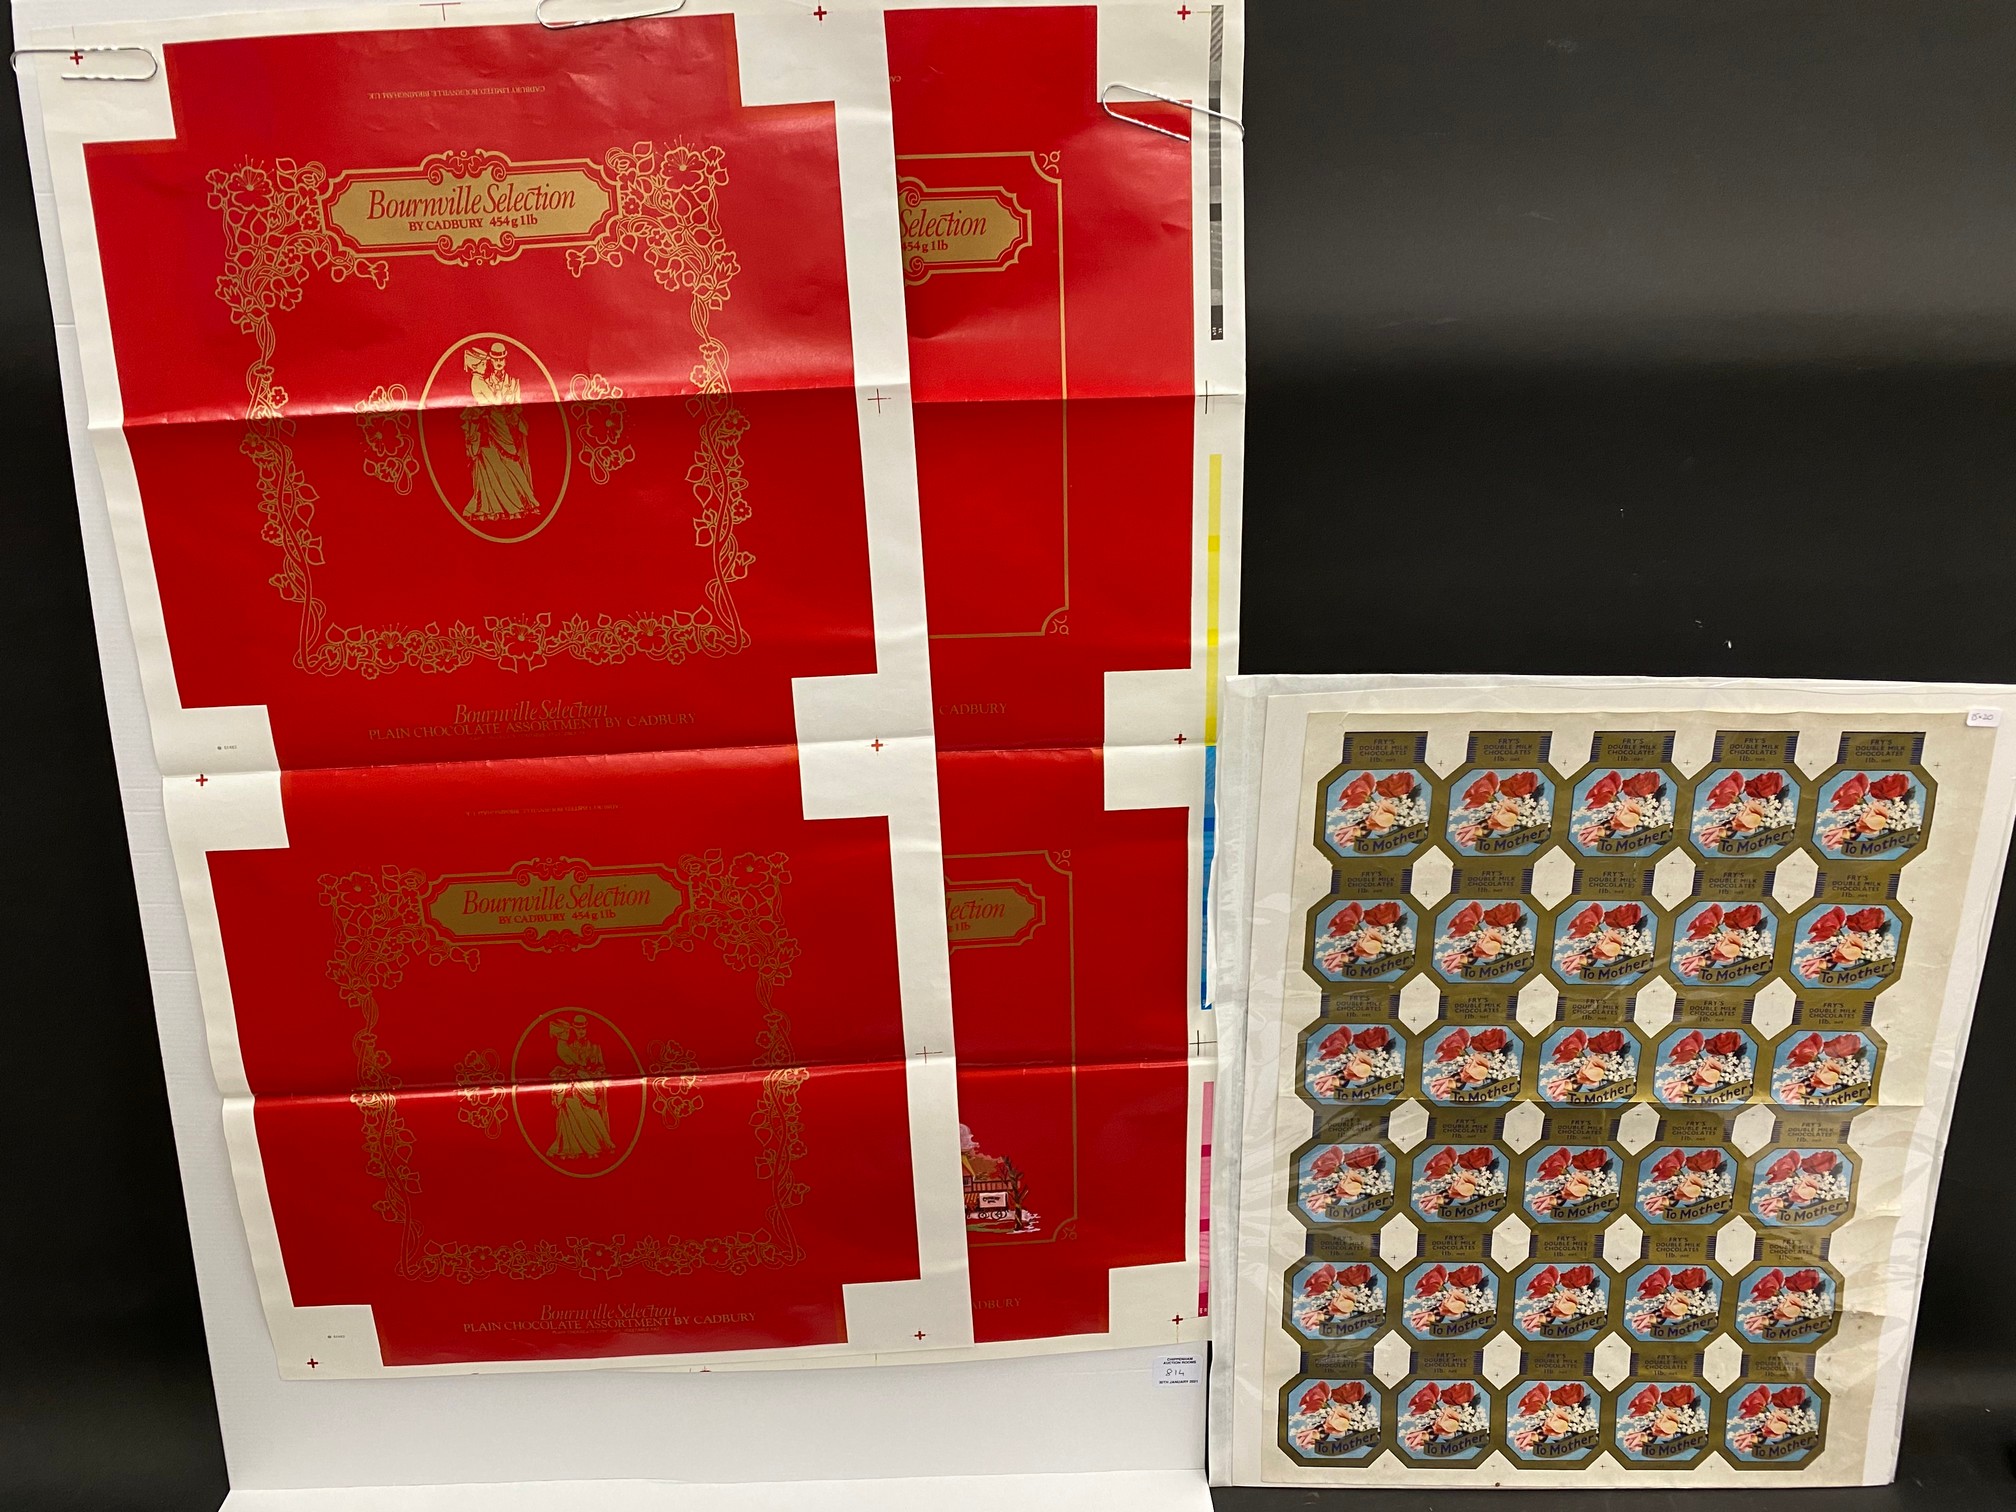 Two Cadbury's Bournville 1970s chocolate printer's proofs plus an uncut sheet of Fry's chocolate 'To